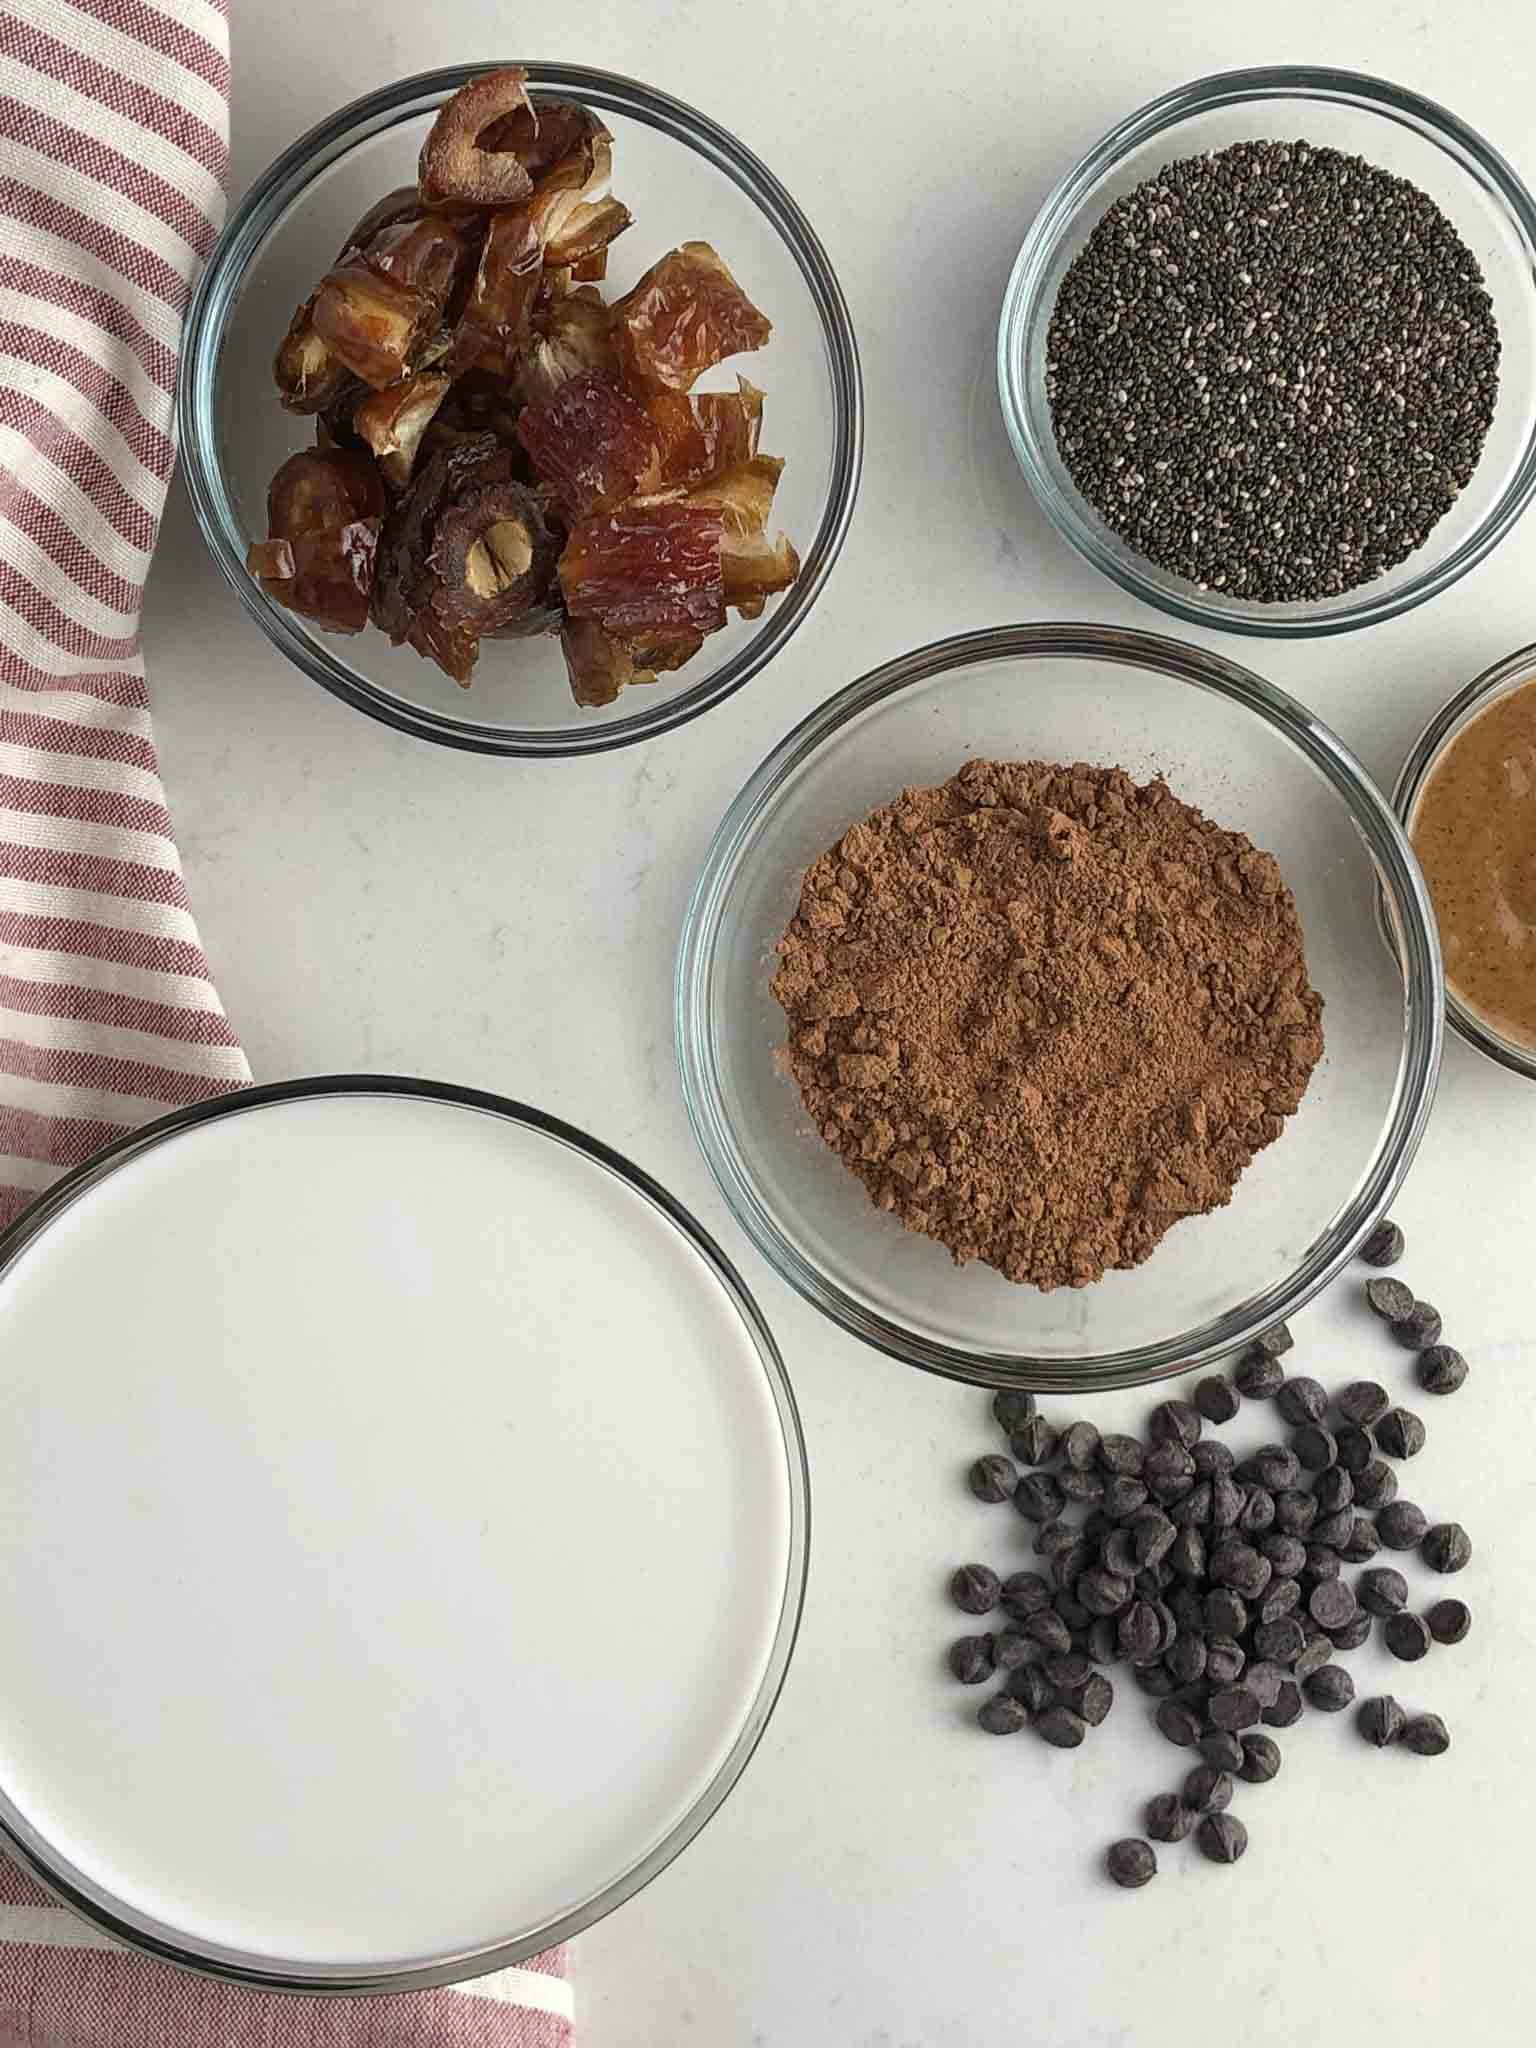 All chocolate chia seed mousse ingredients in bowls laid out on a white table